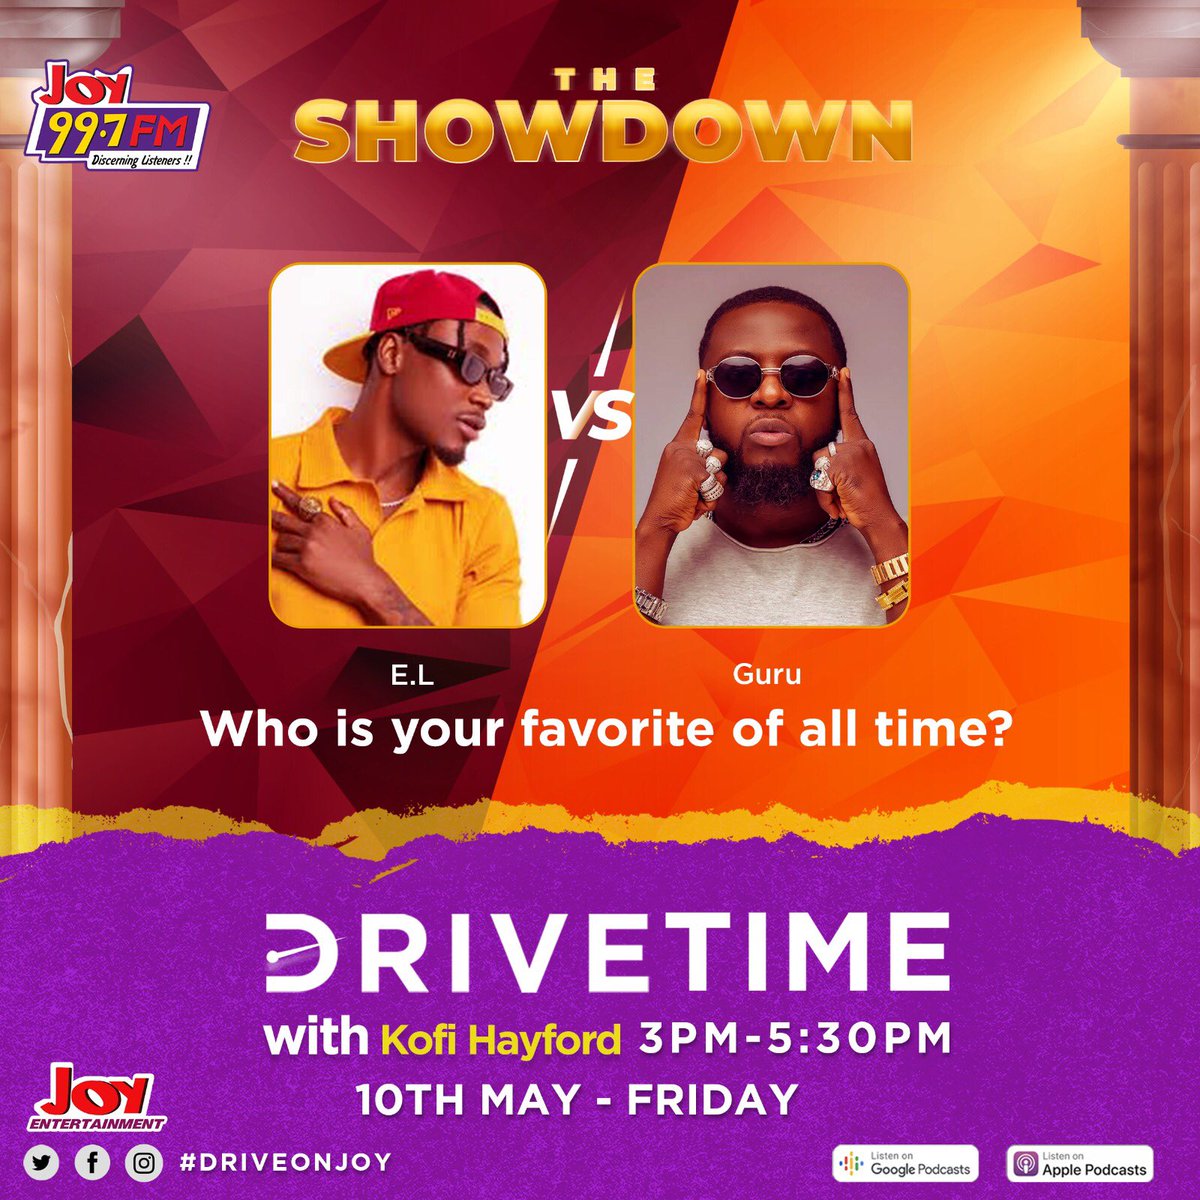 Hits for hits, who are you picking? @ELgh_ or @gurunkz. Let’s settle this on Drive Time with @kofihayford233 this afternoon! #DriveOnJoy